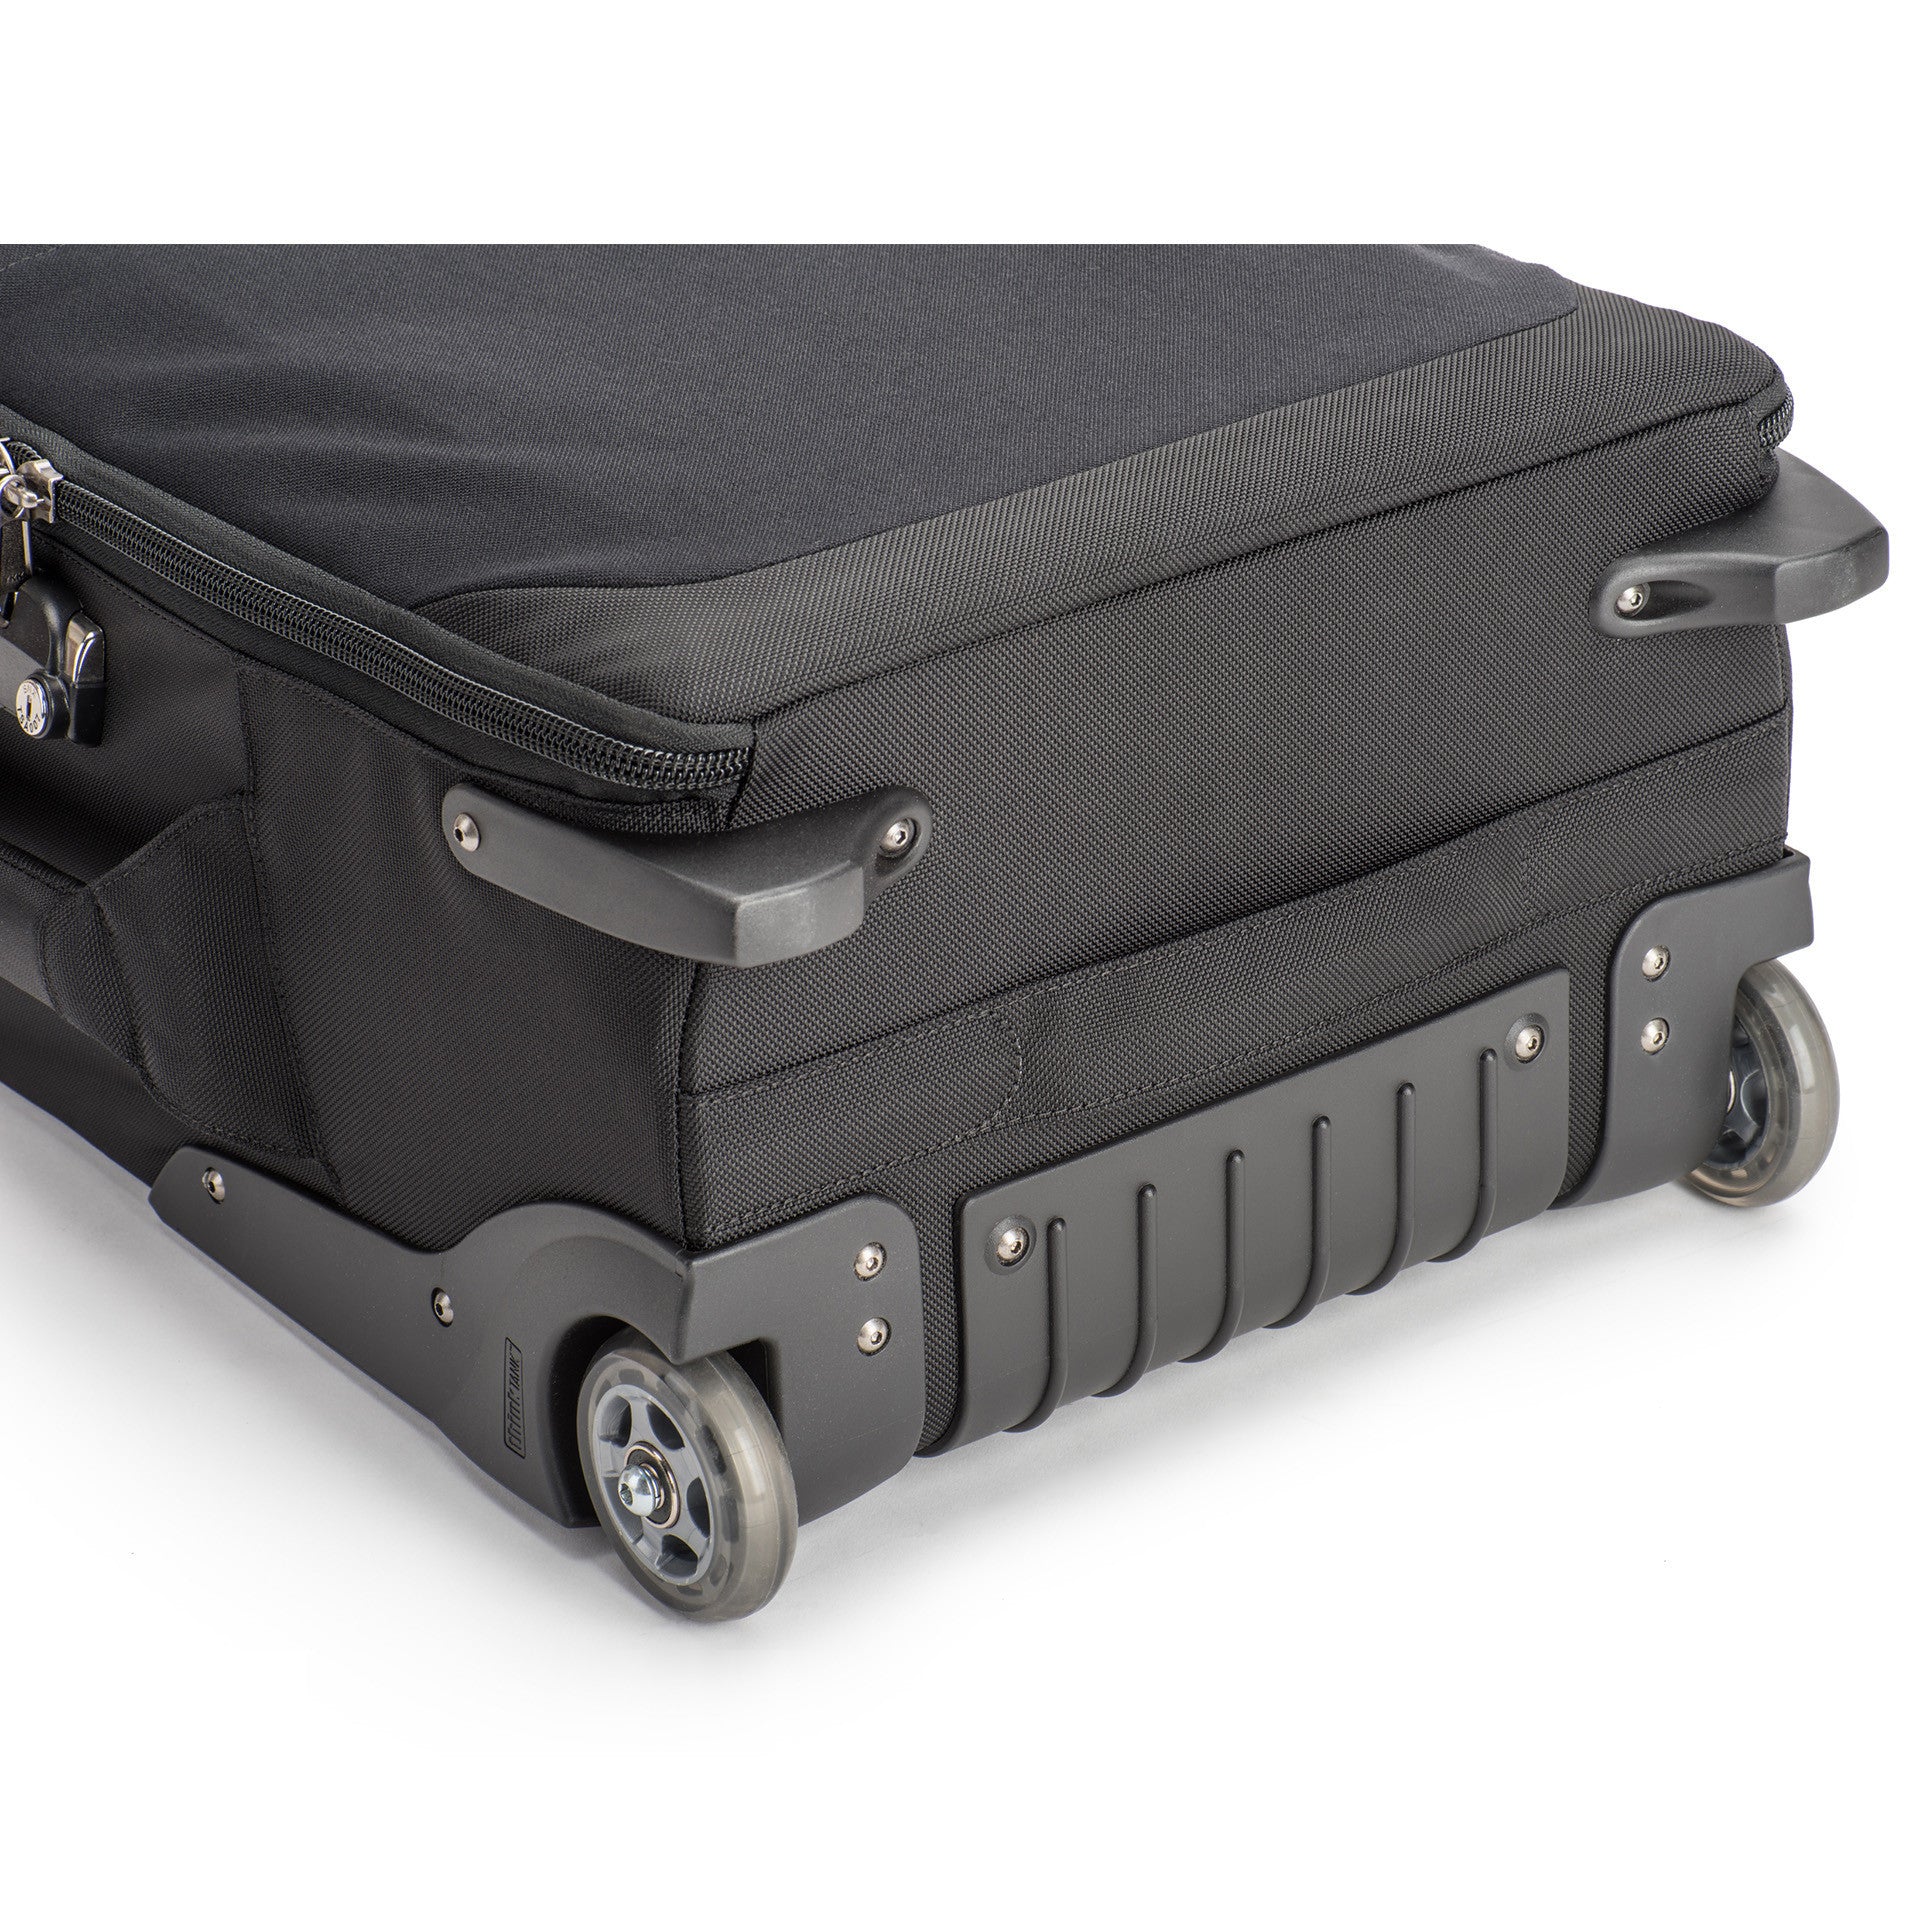 Think Tank Airport Security V3.0 Rolling Camera Bag, bags roller bags, Think Tank Photo - Pictureline  - 6